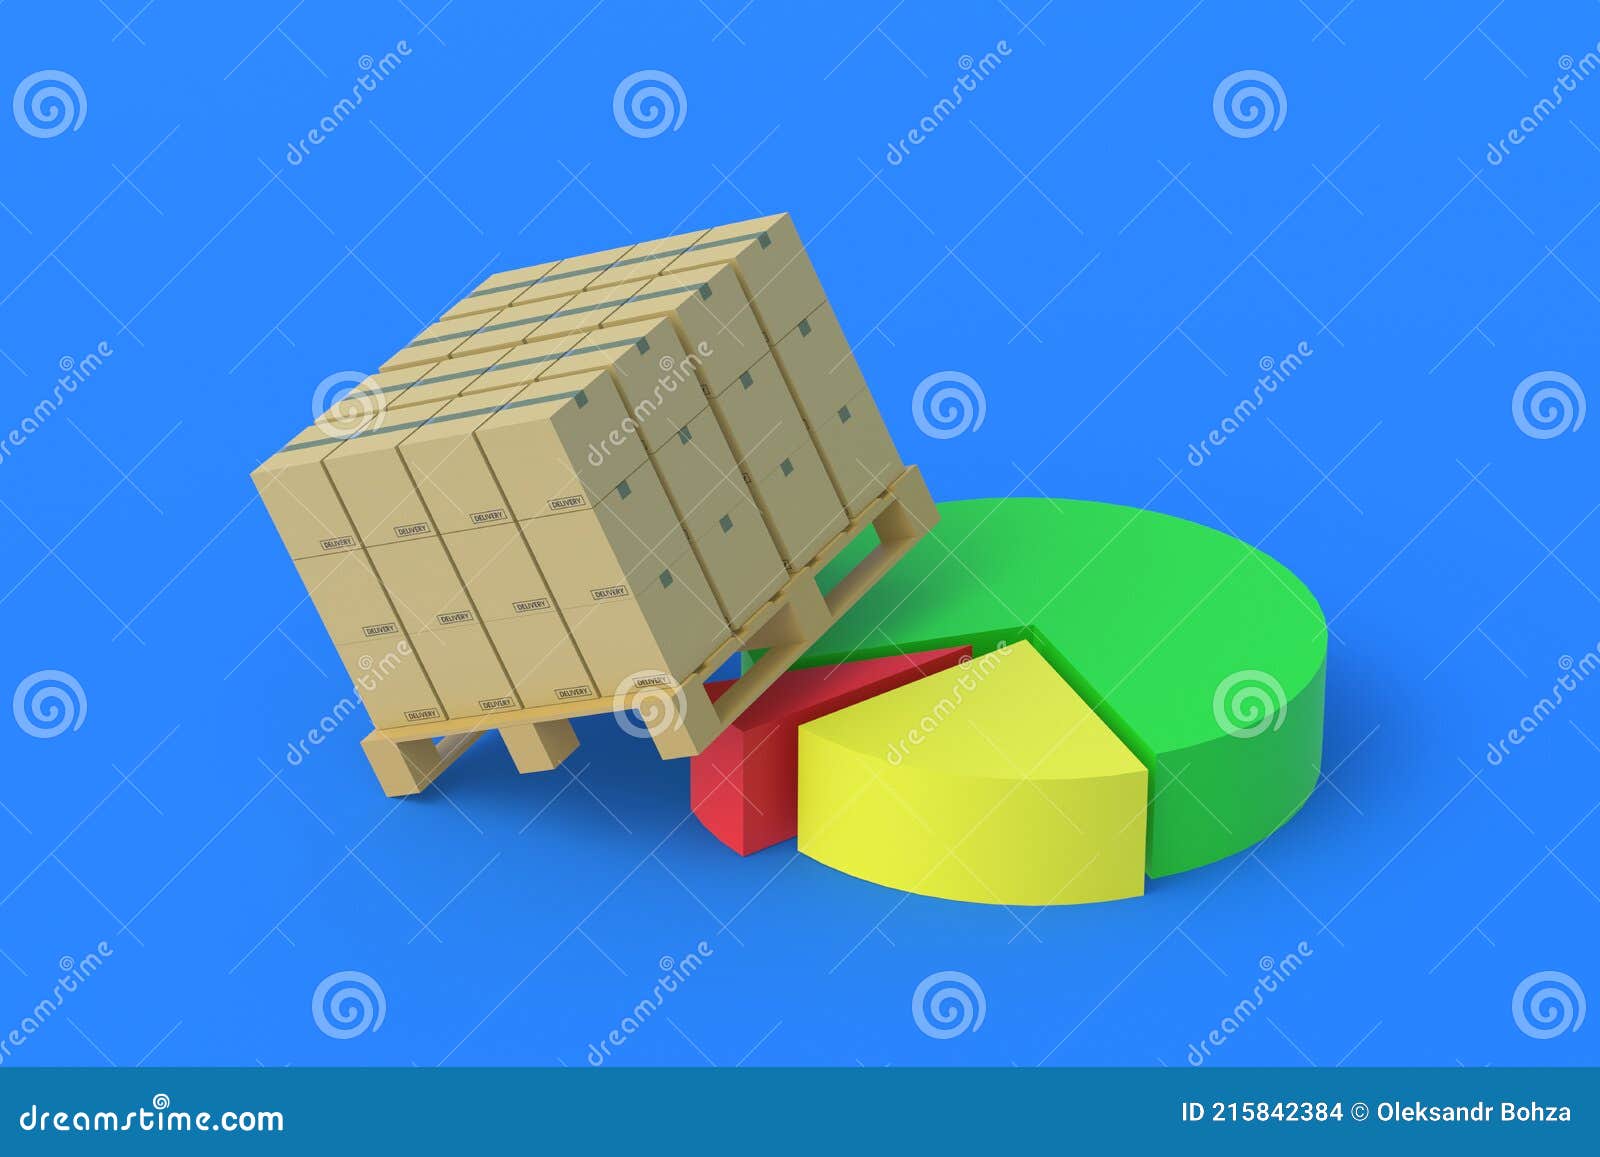 Cardboard Boxes On Pallet Near Pie Chart Stock Photo - Image of